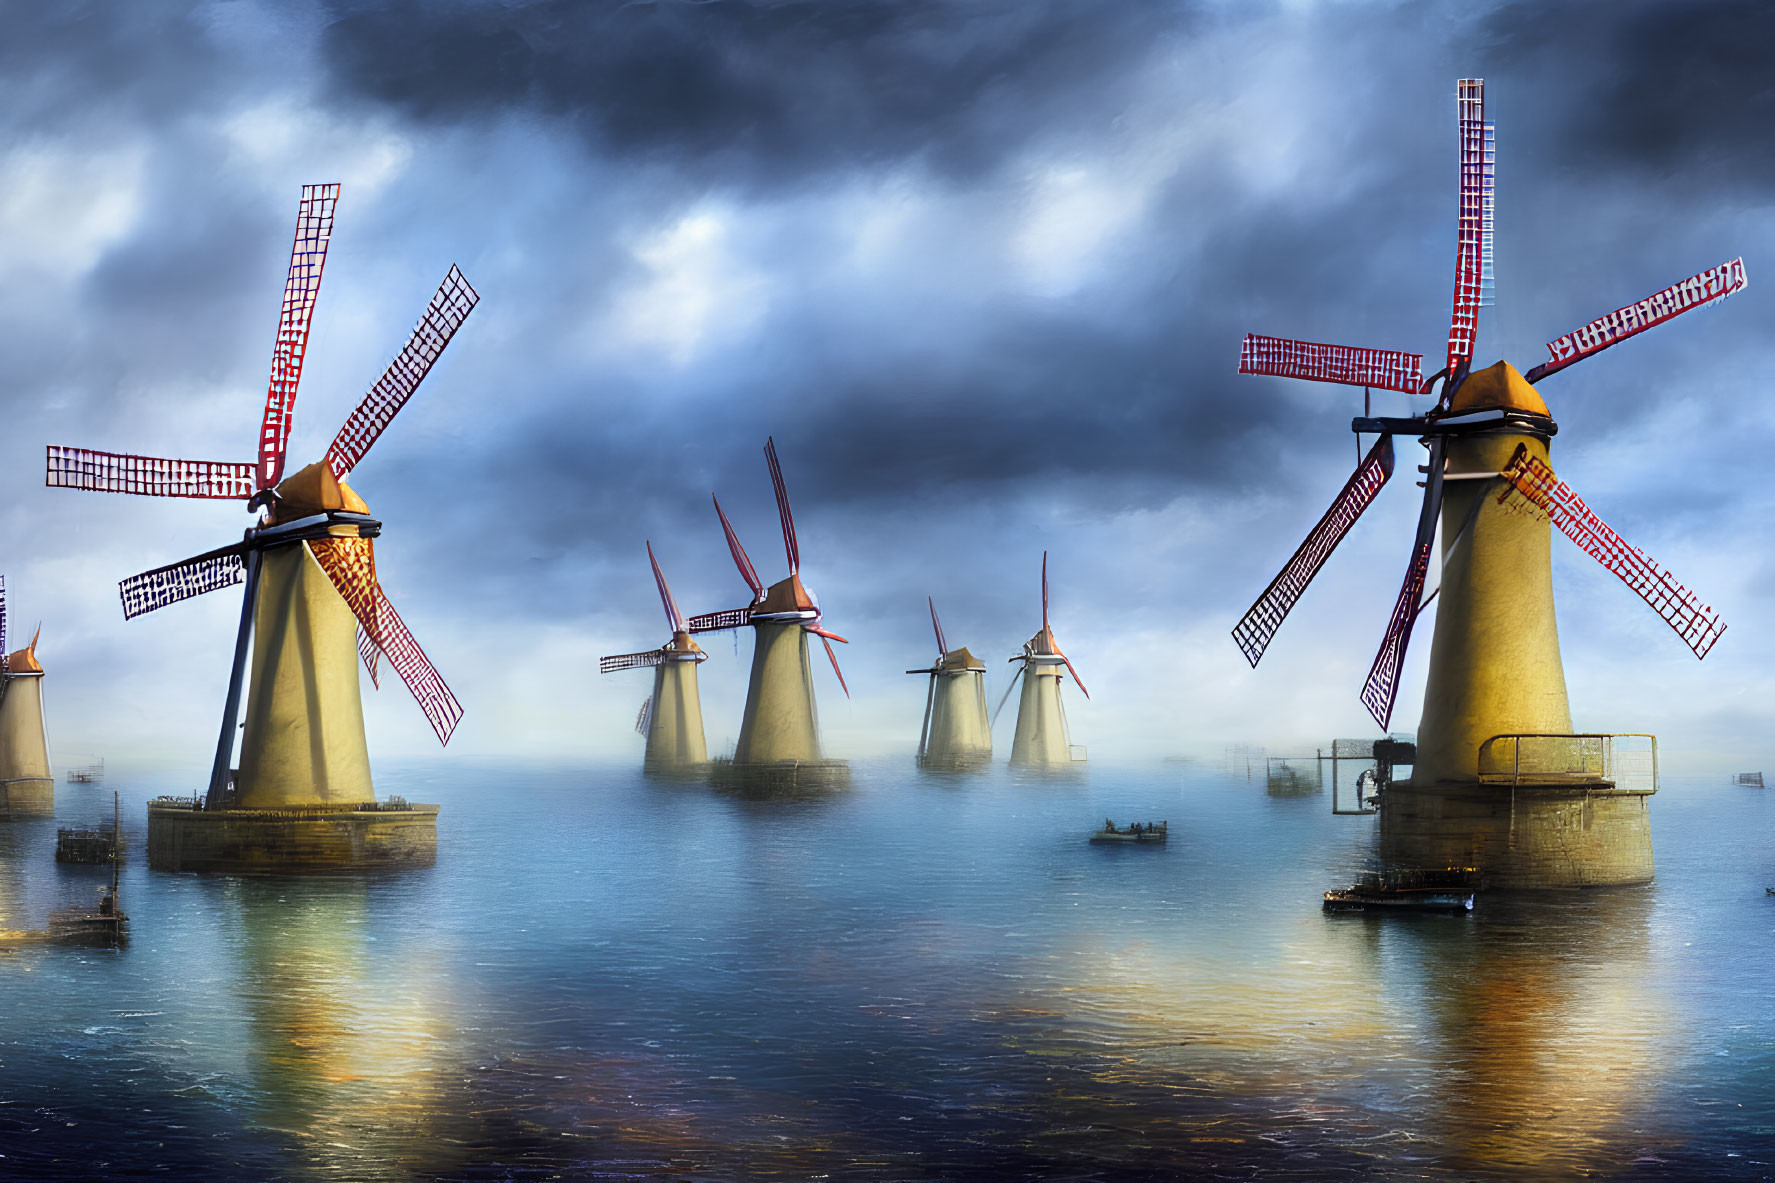 Traditional windmills with red vanes in misty landscape